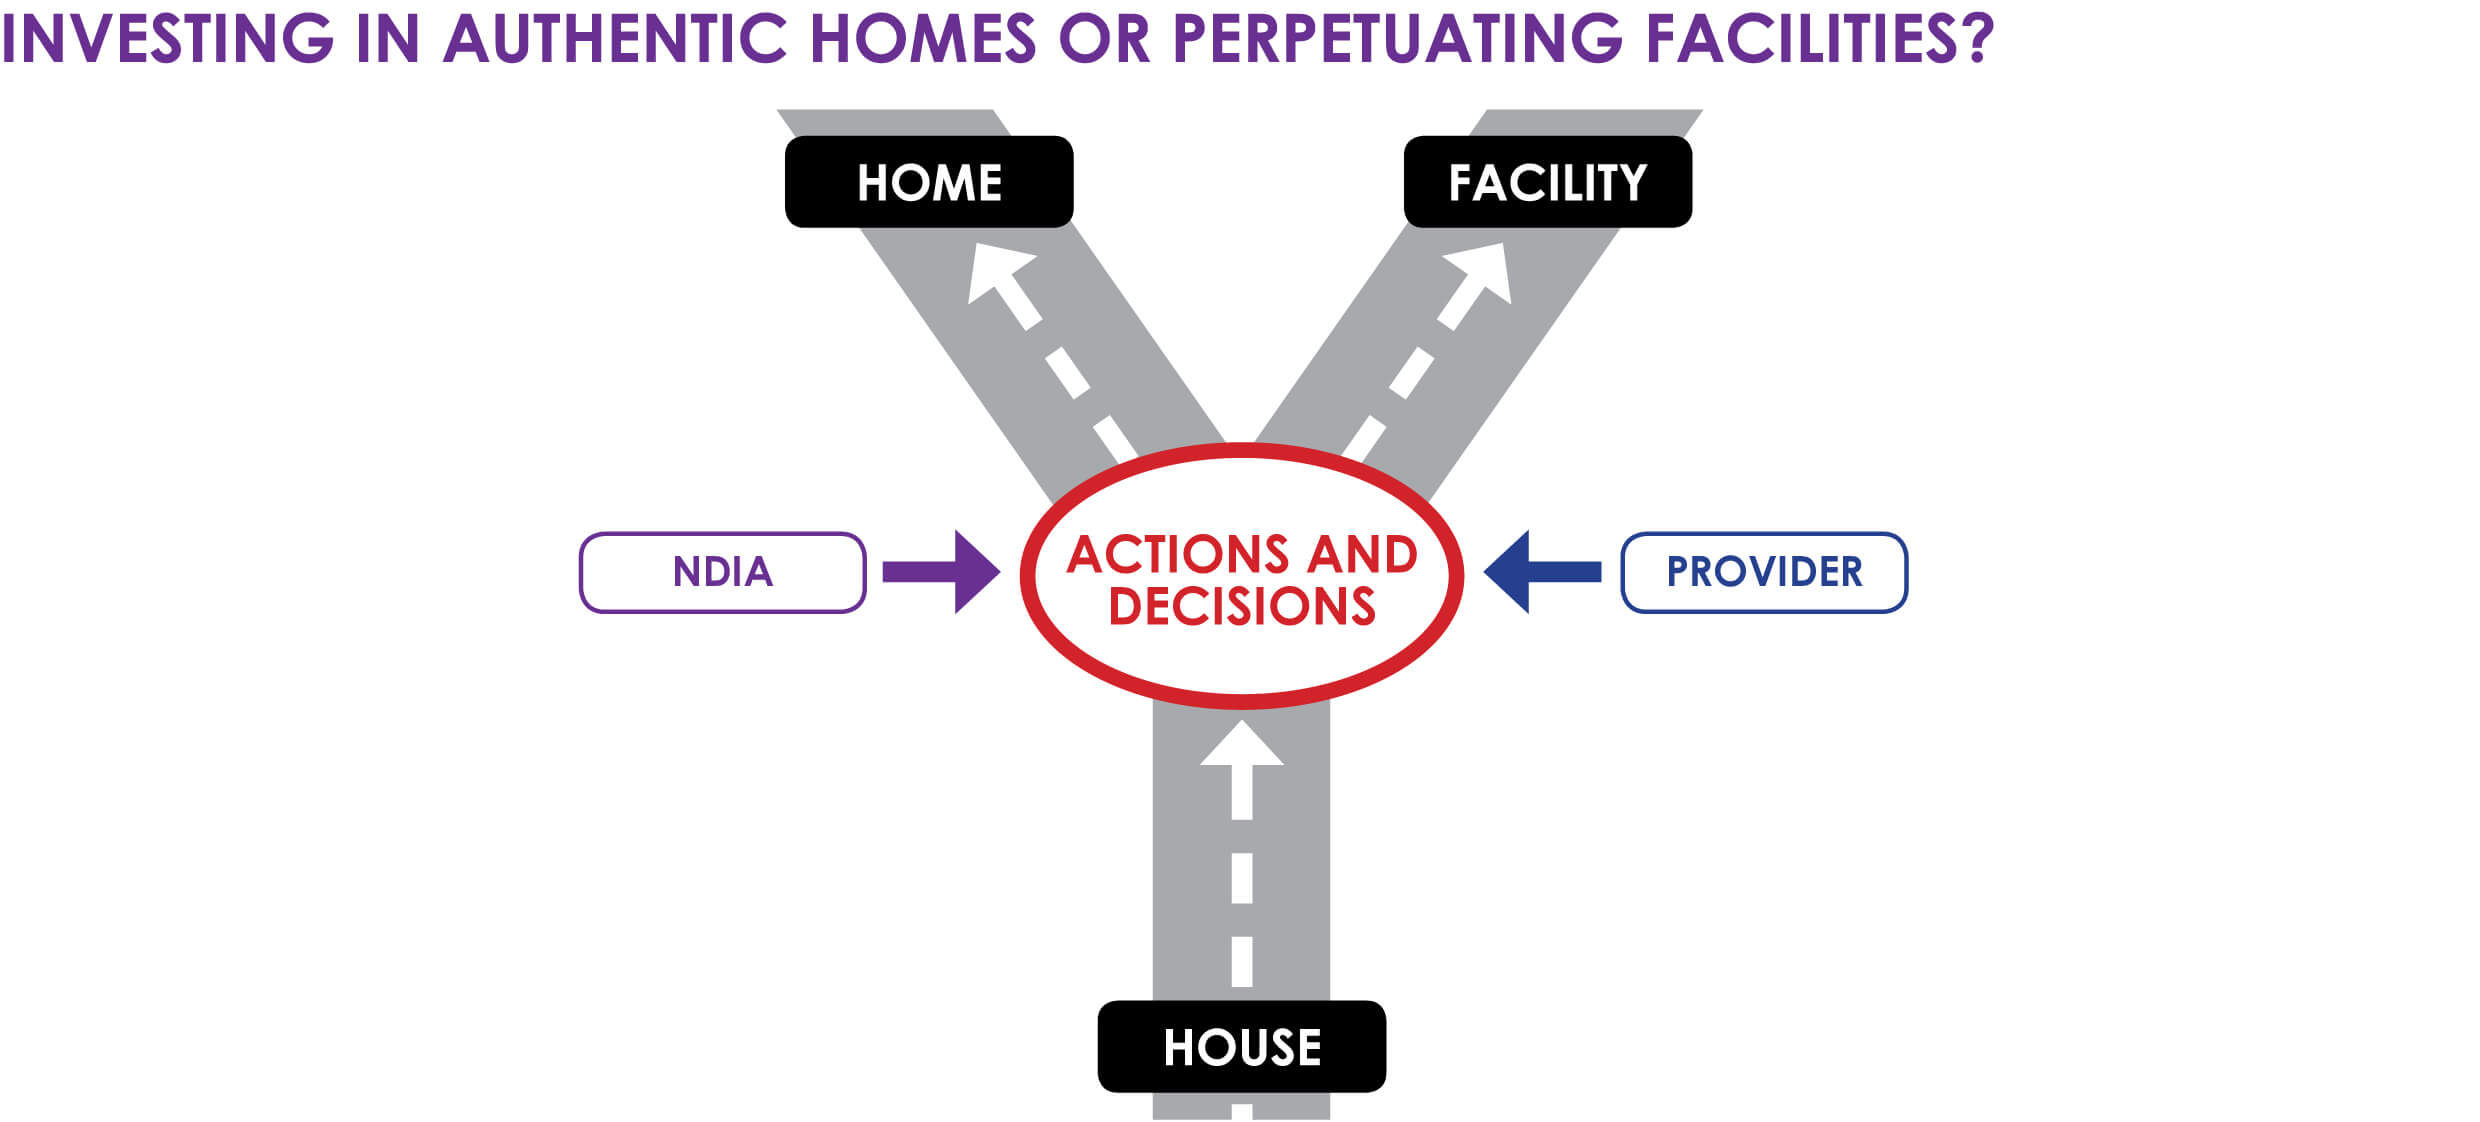 Diagram showing a fork in the road, where a house can be a home or a facility depending on actions and decisions of the NDIS and facility. 